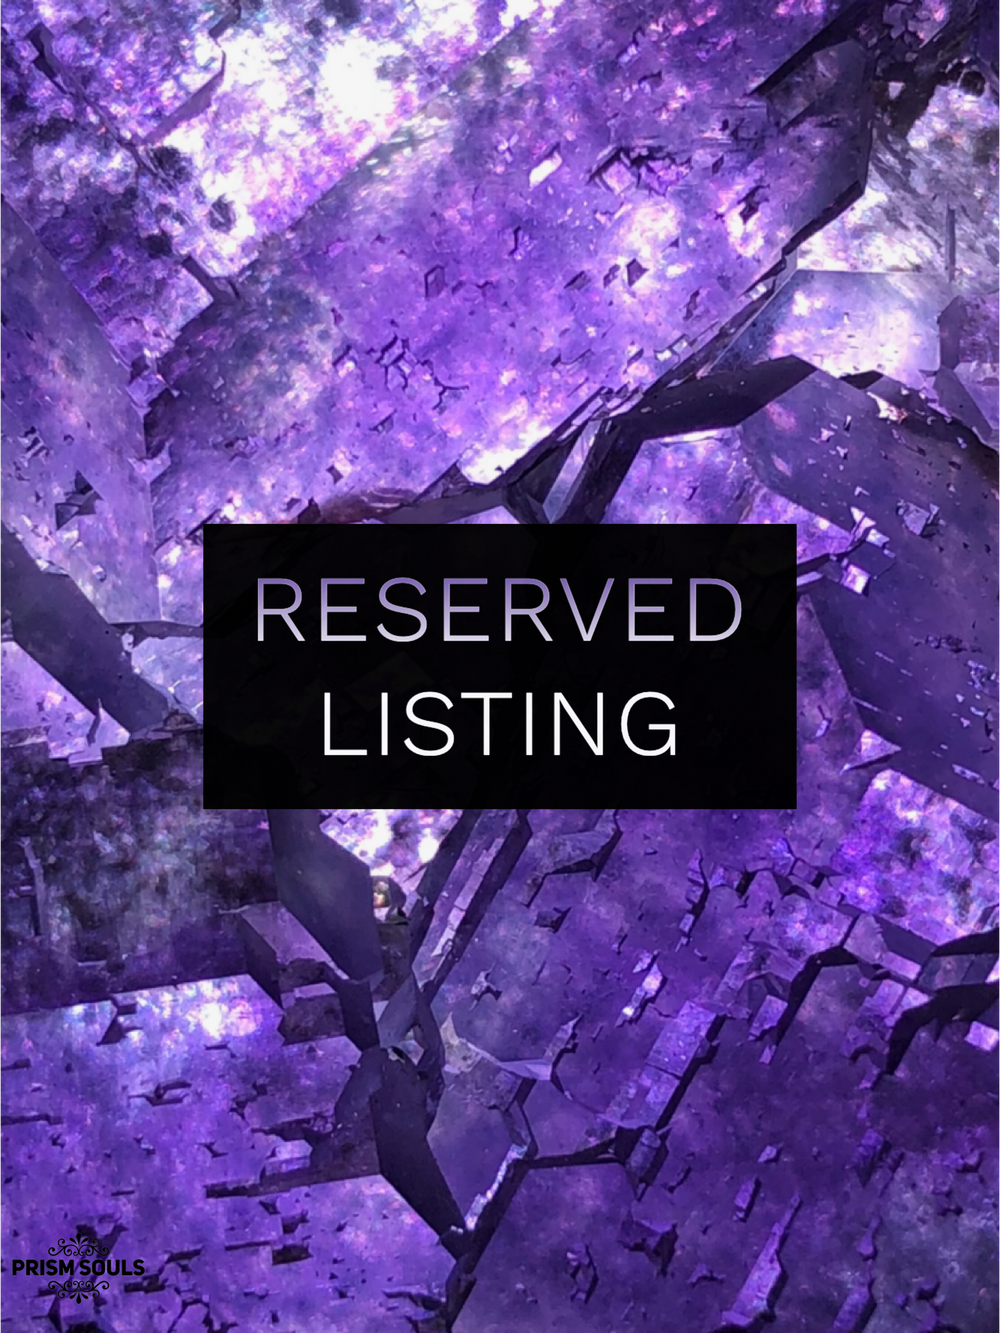 RESERVED LISTING - casiecole23